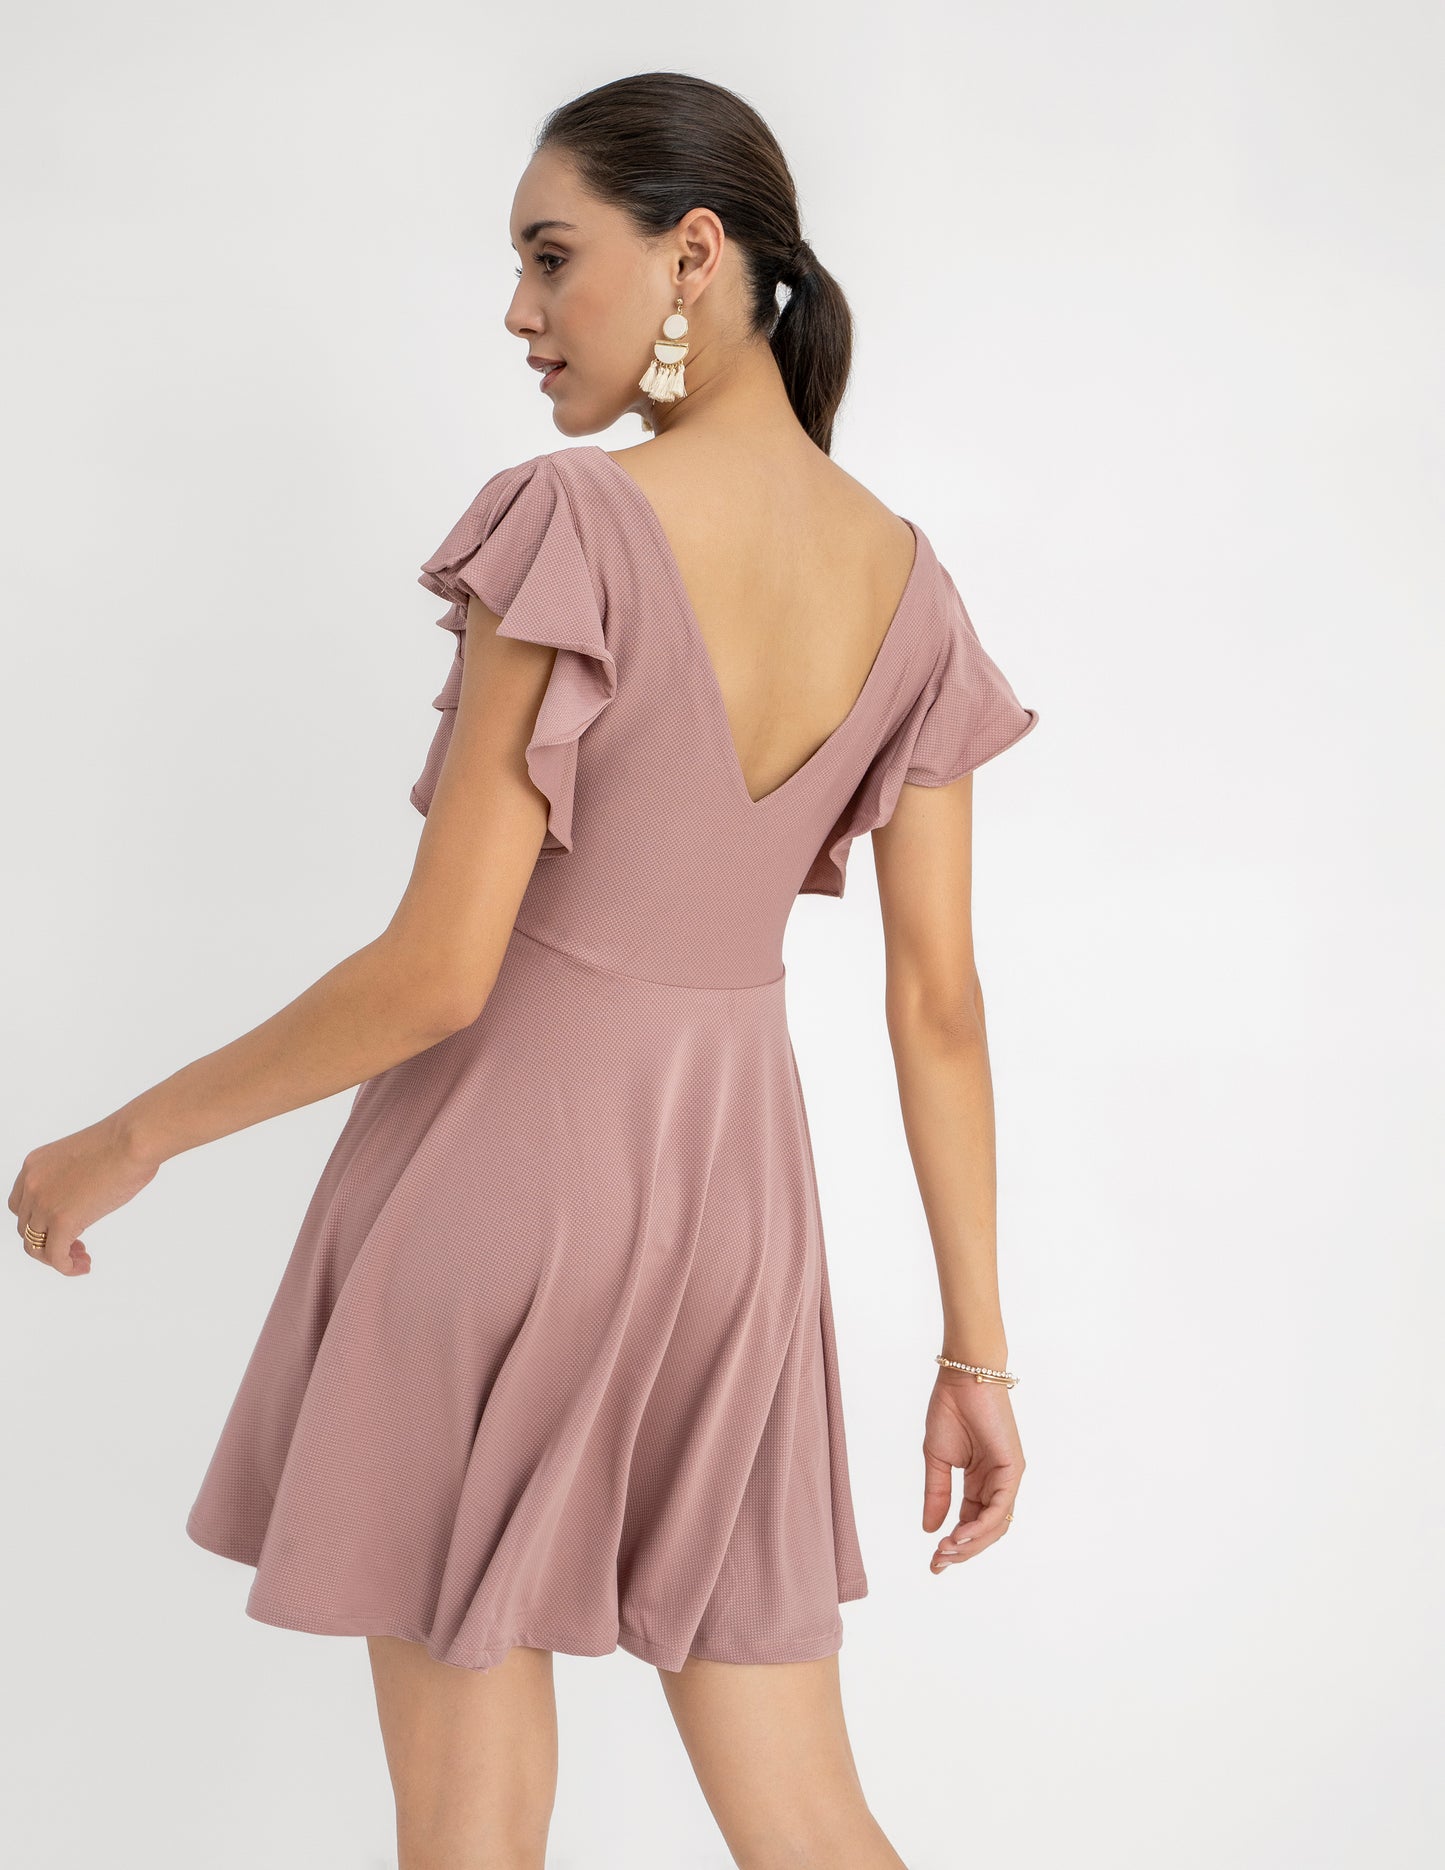 CRAYONIC CUT-OUT SKATER DRESS